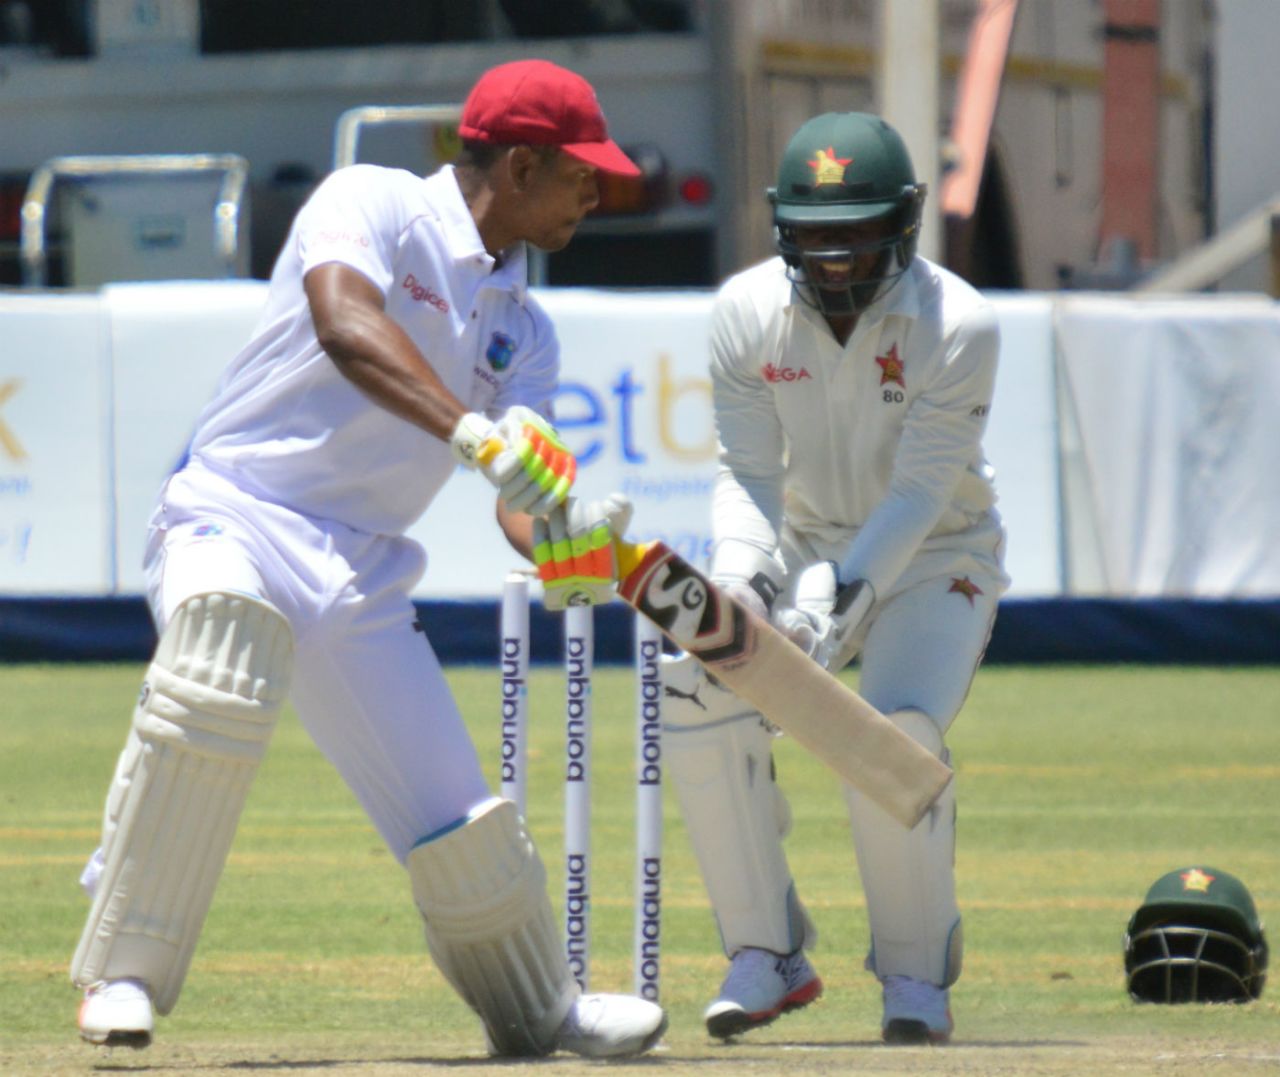 Kieran Powell steers one through point, Zimbabwe v West Indies, 2nd Test, 3rd day, Bulawayo, October 31, 2017